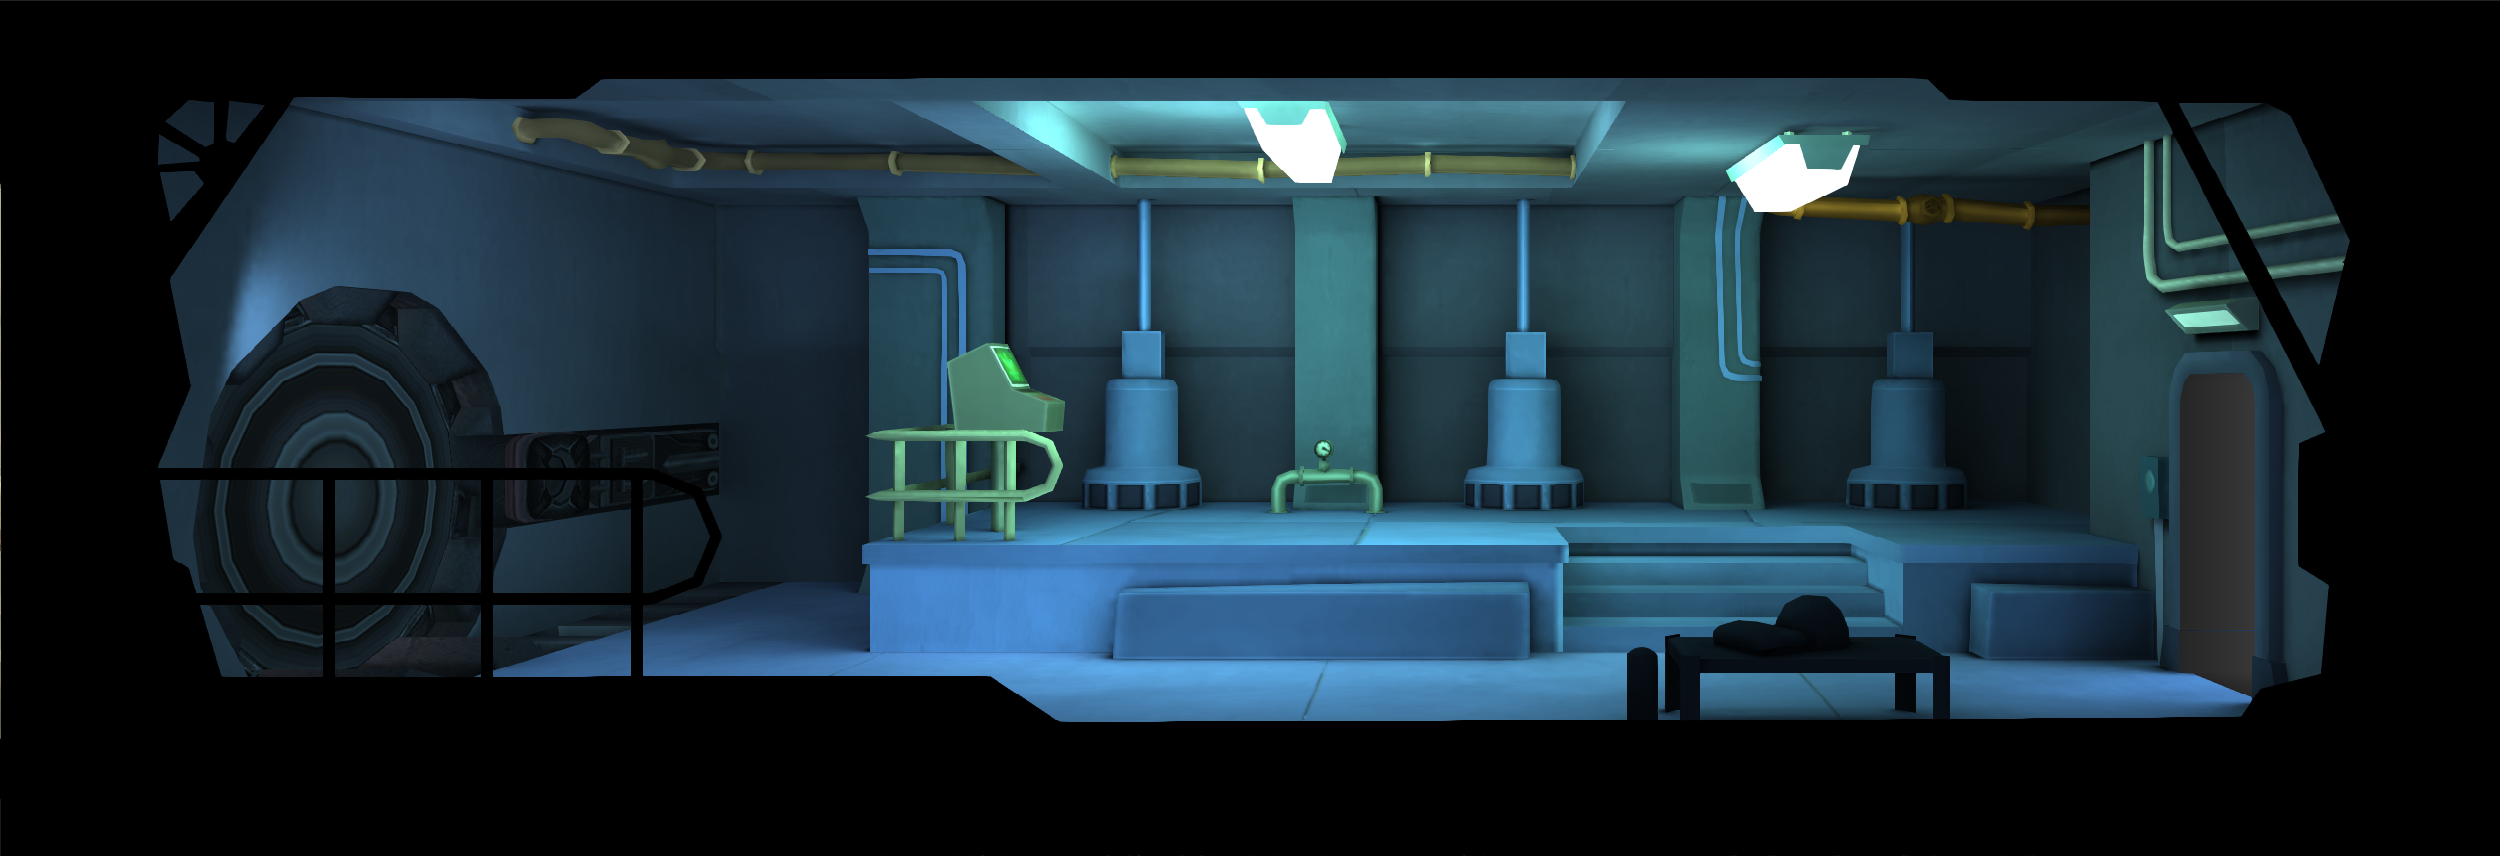 fallout shelter room special